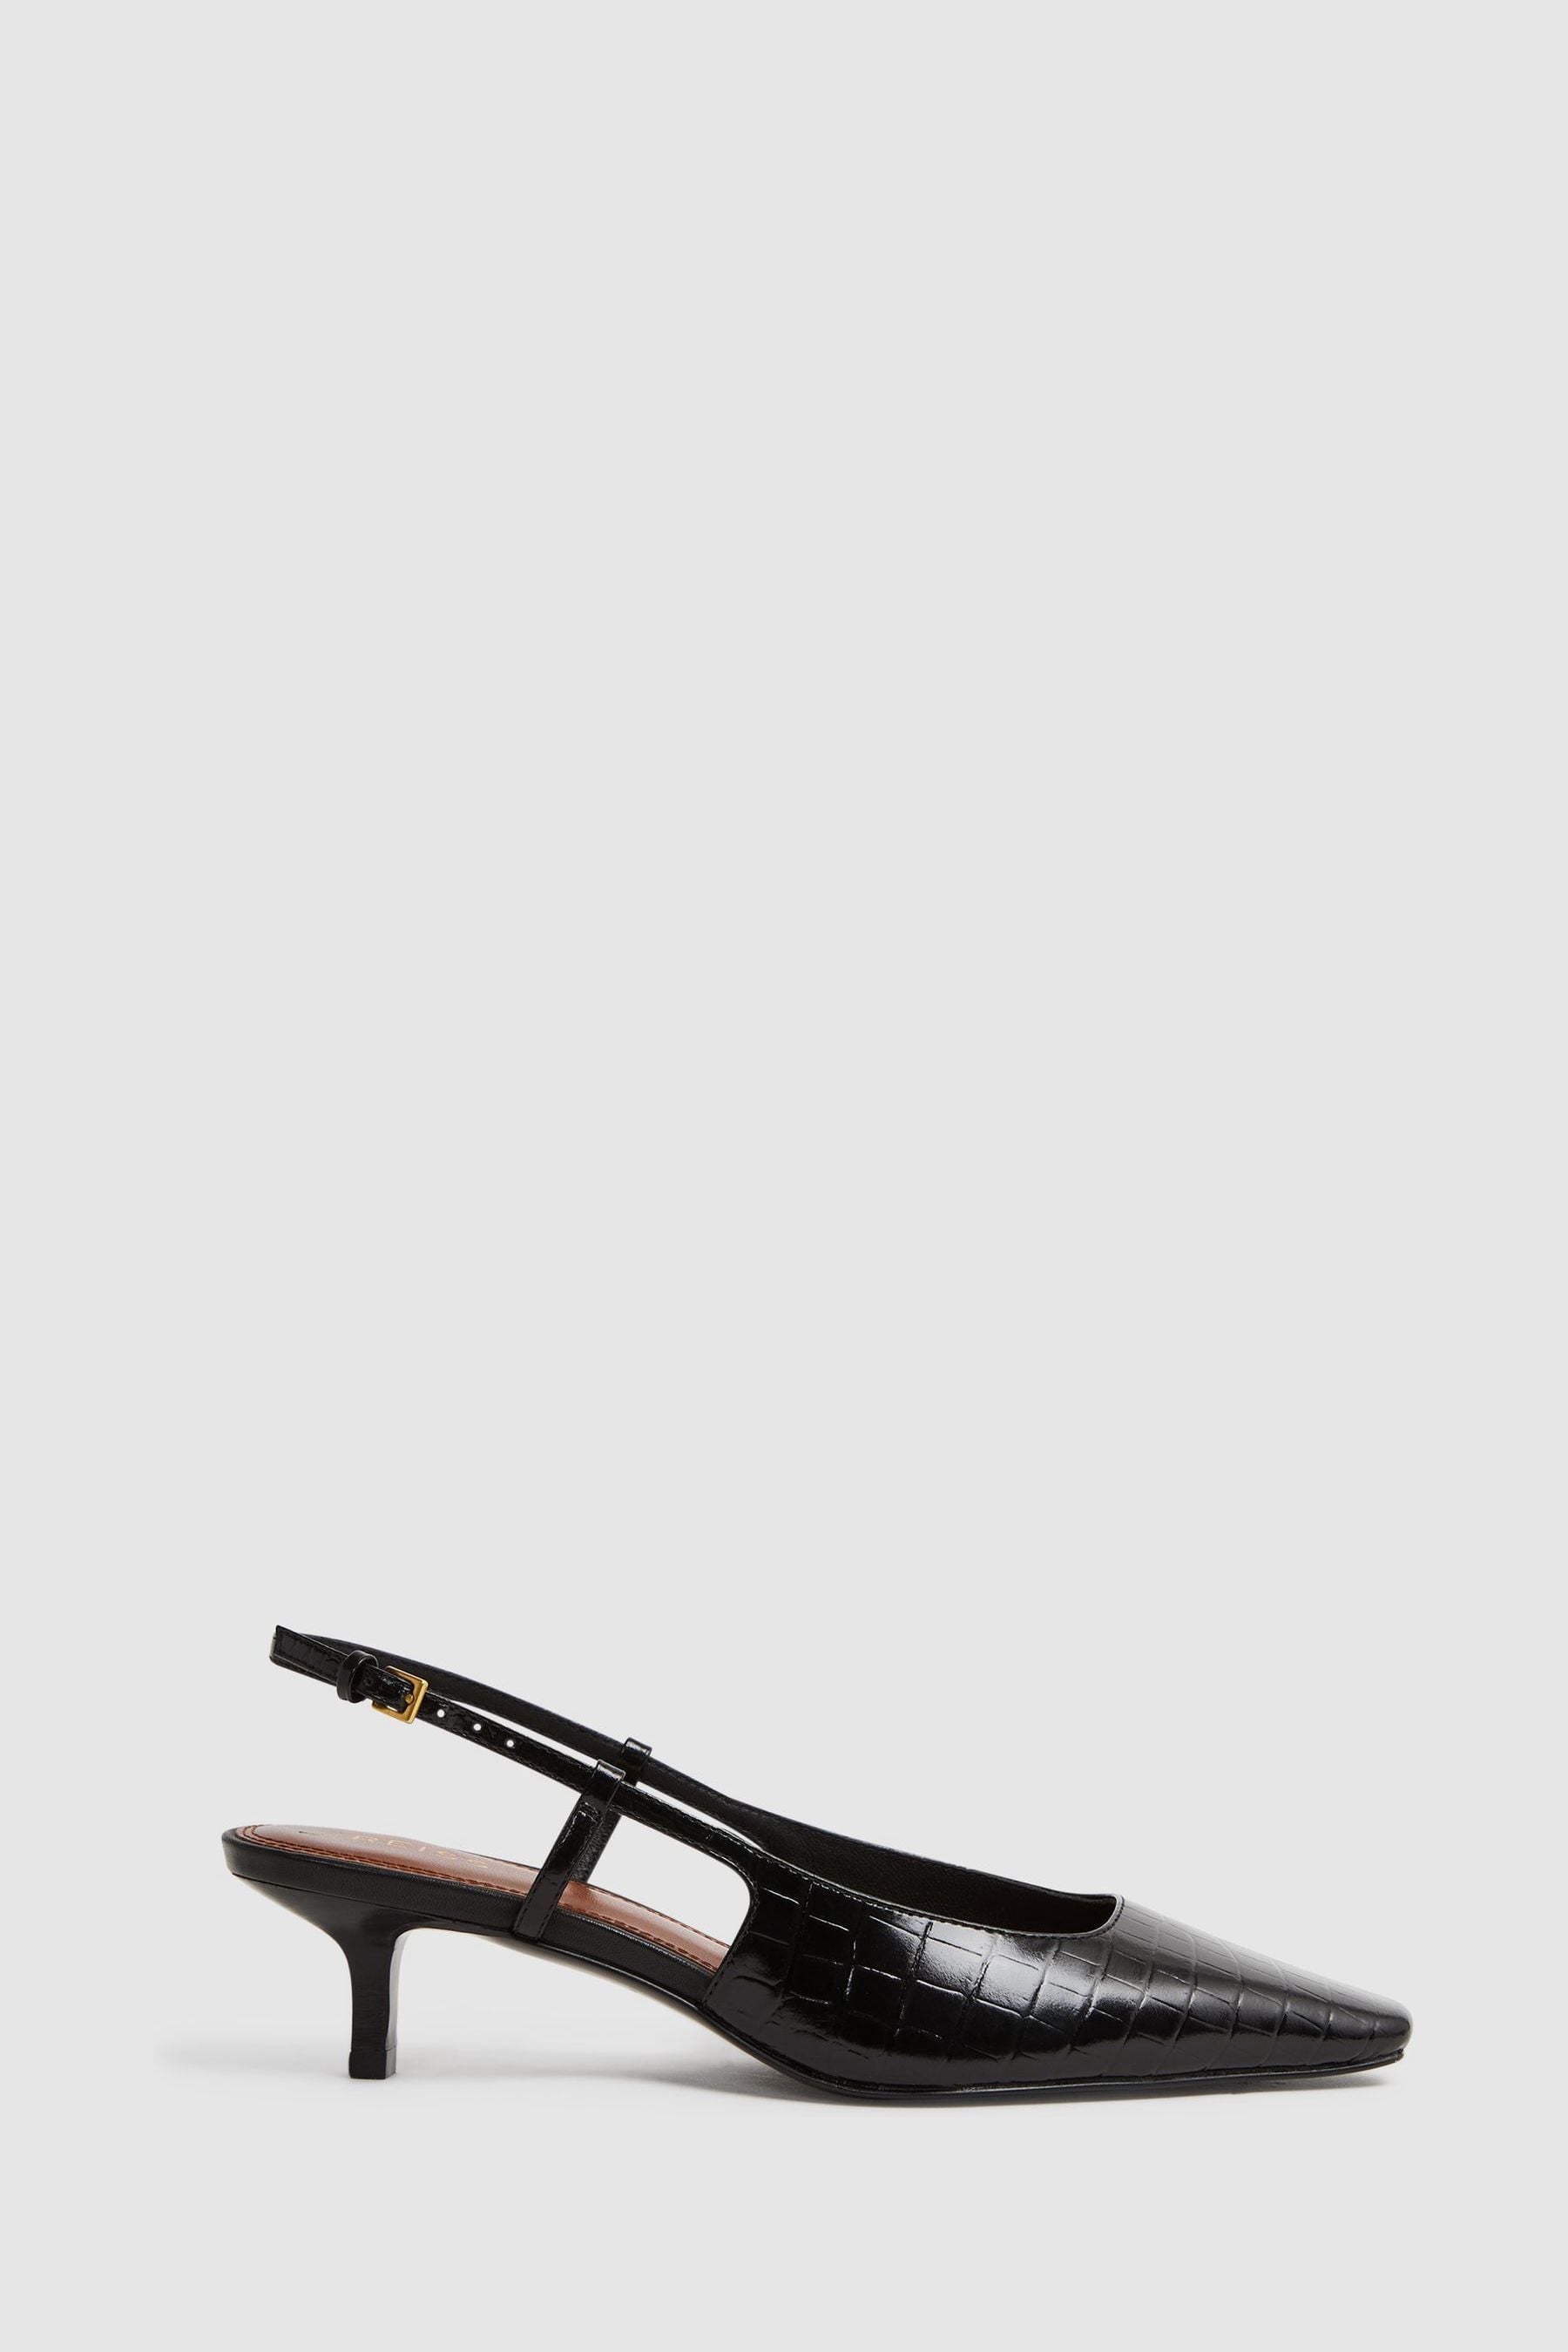 Buy Reiss Jade Leather Slingback Heels from the Next UK online shop